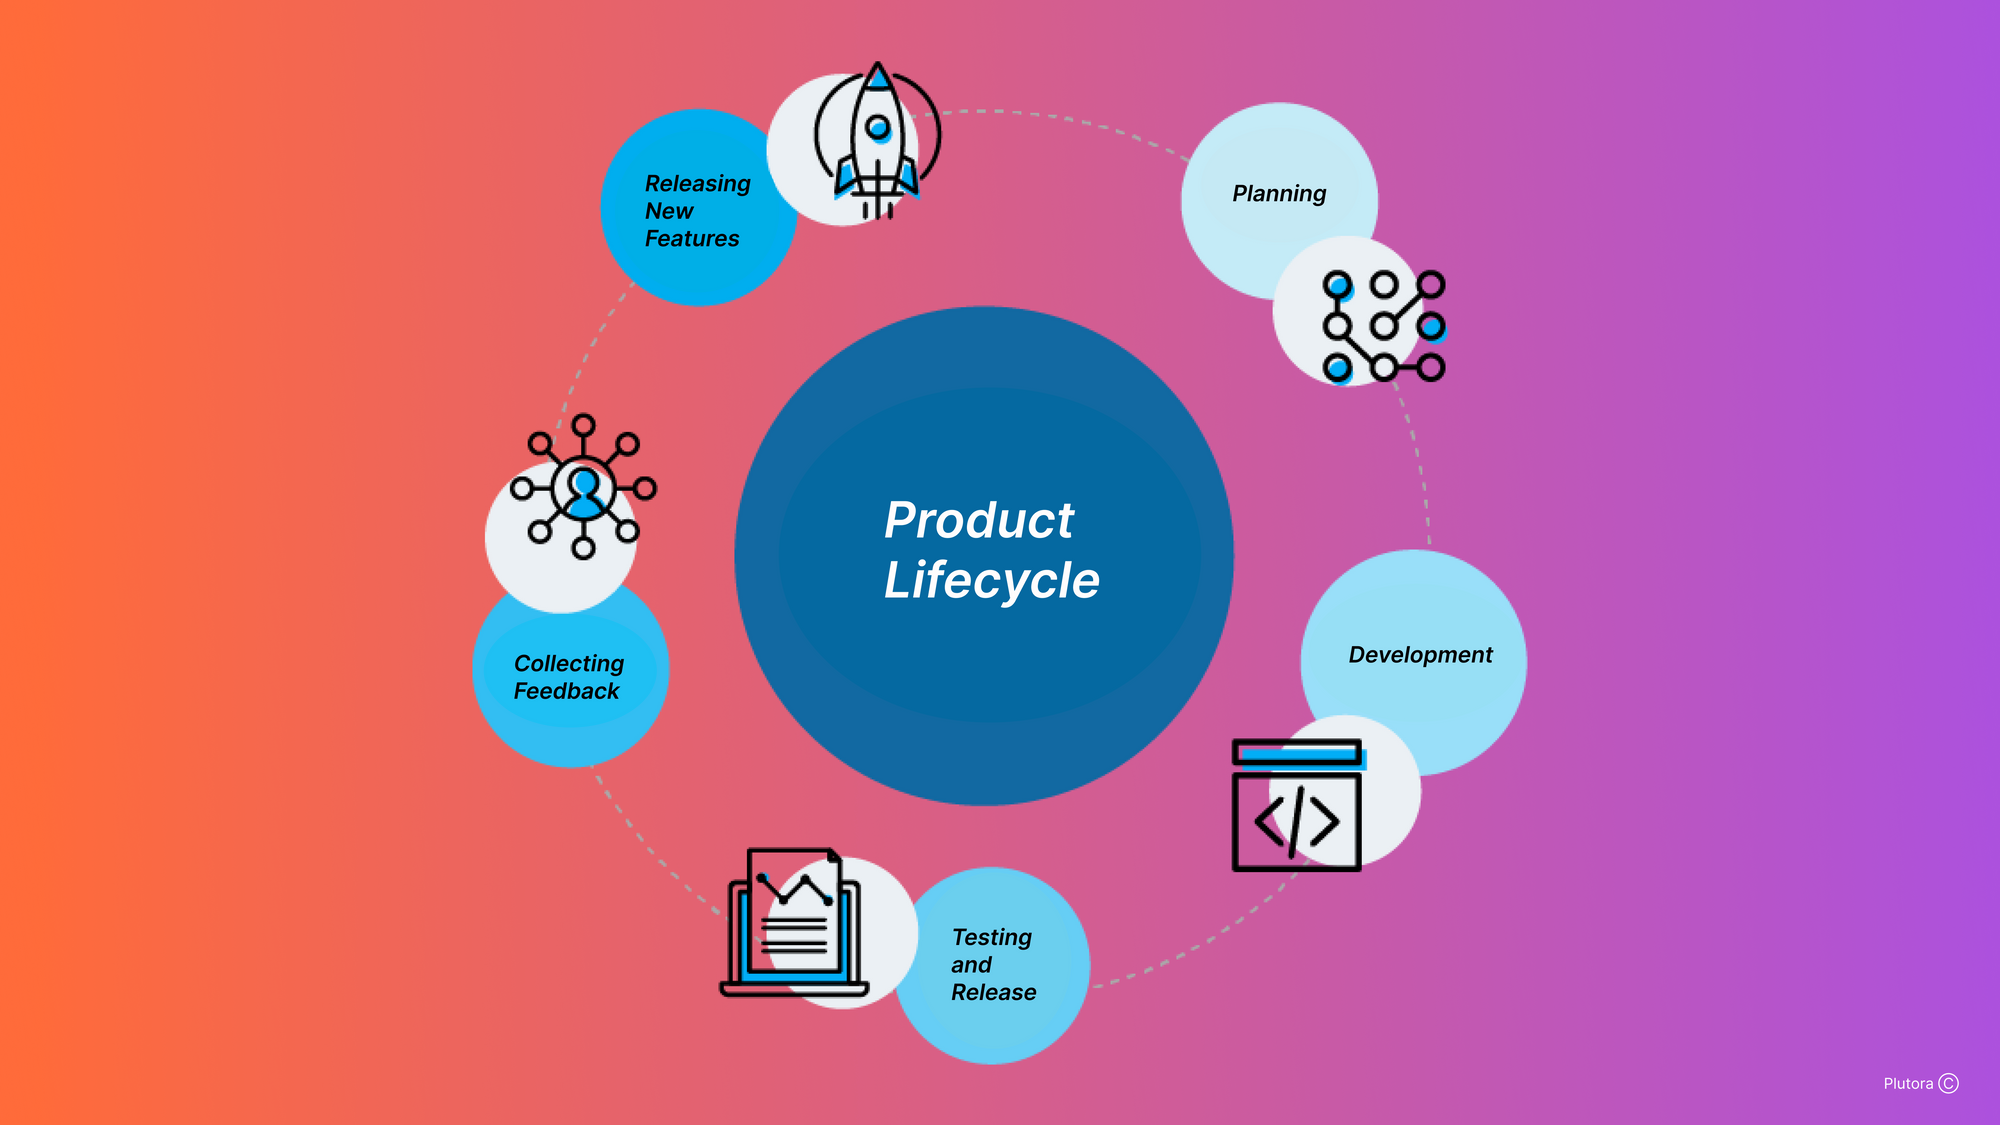 How to manage product releases across different organizations